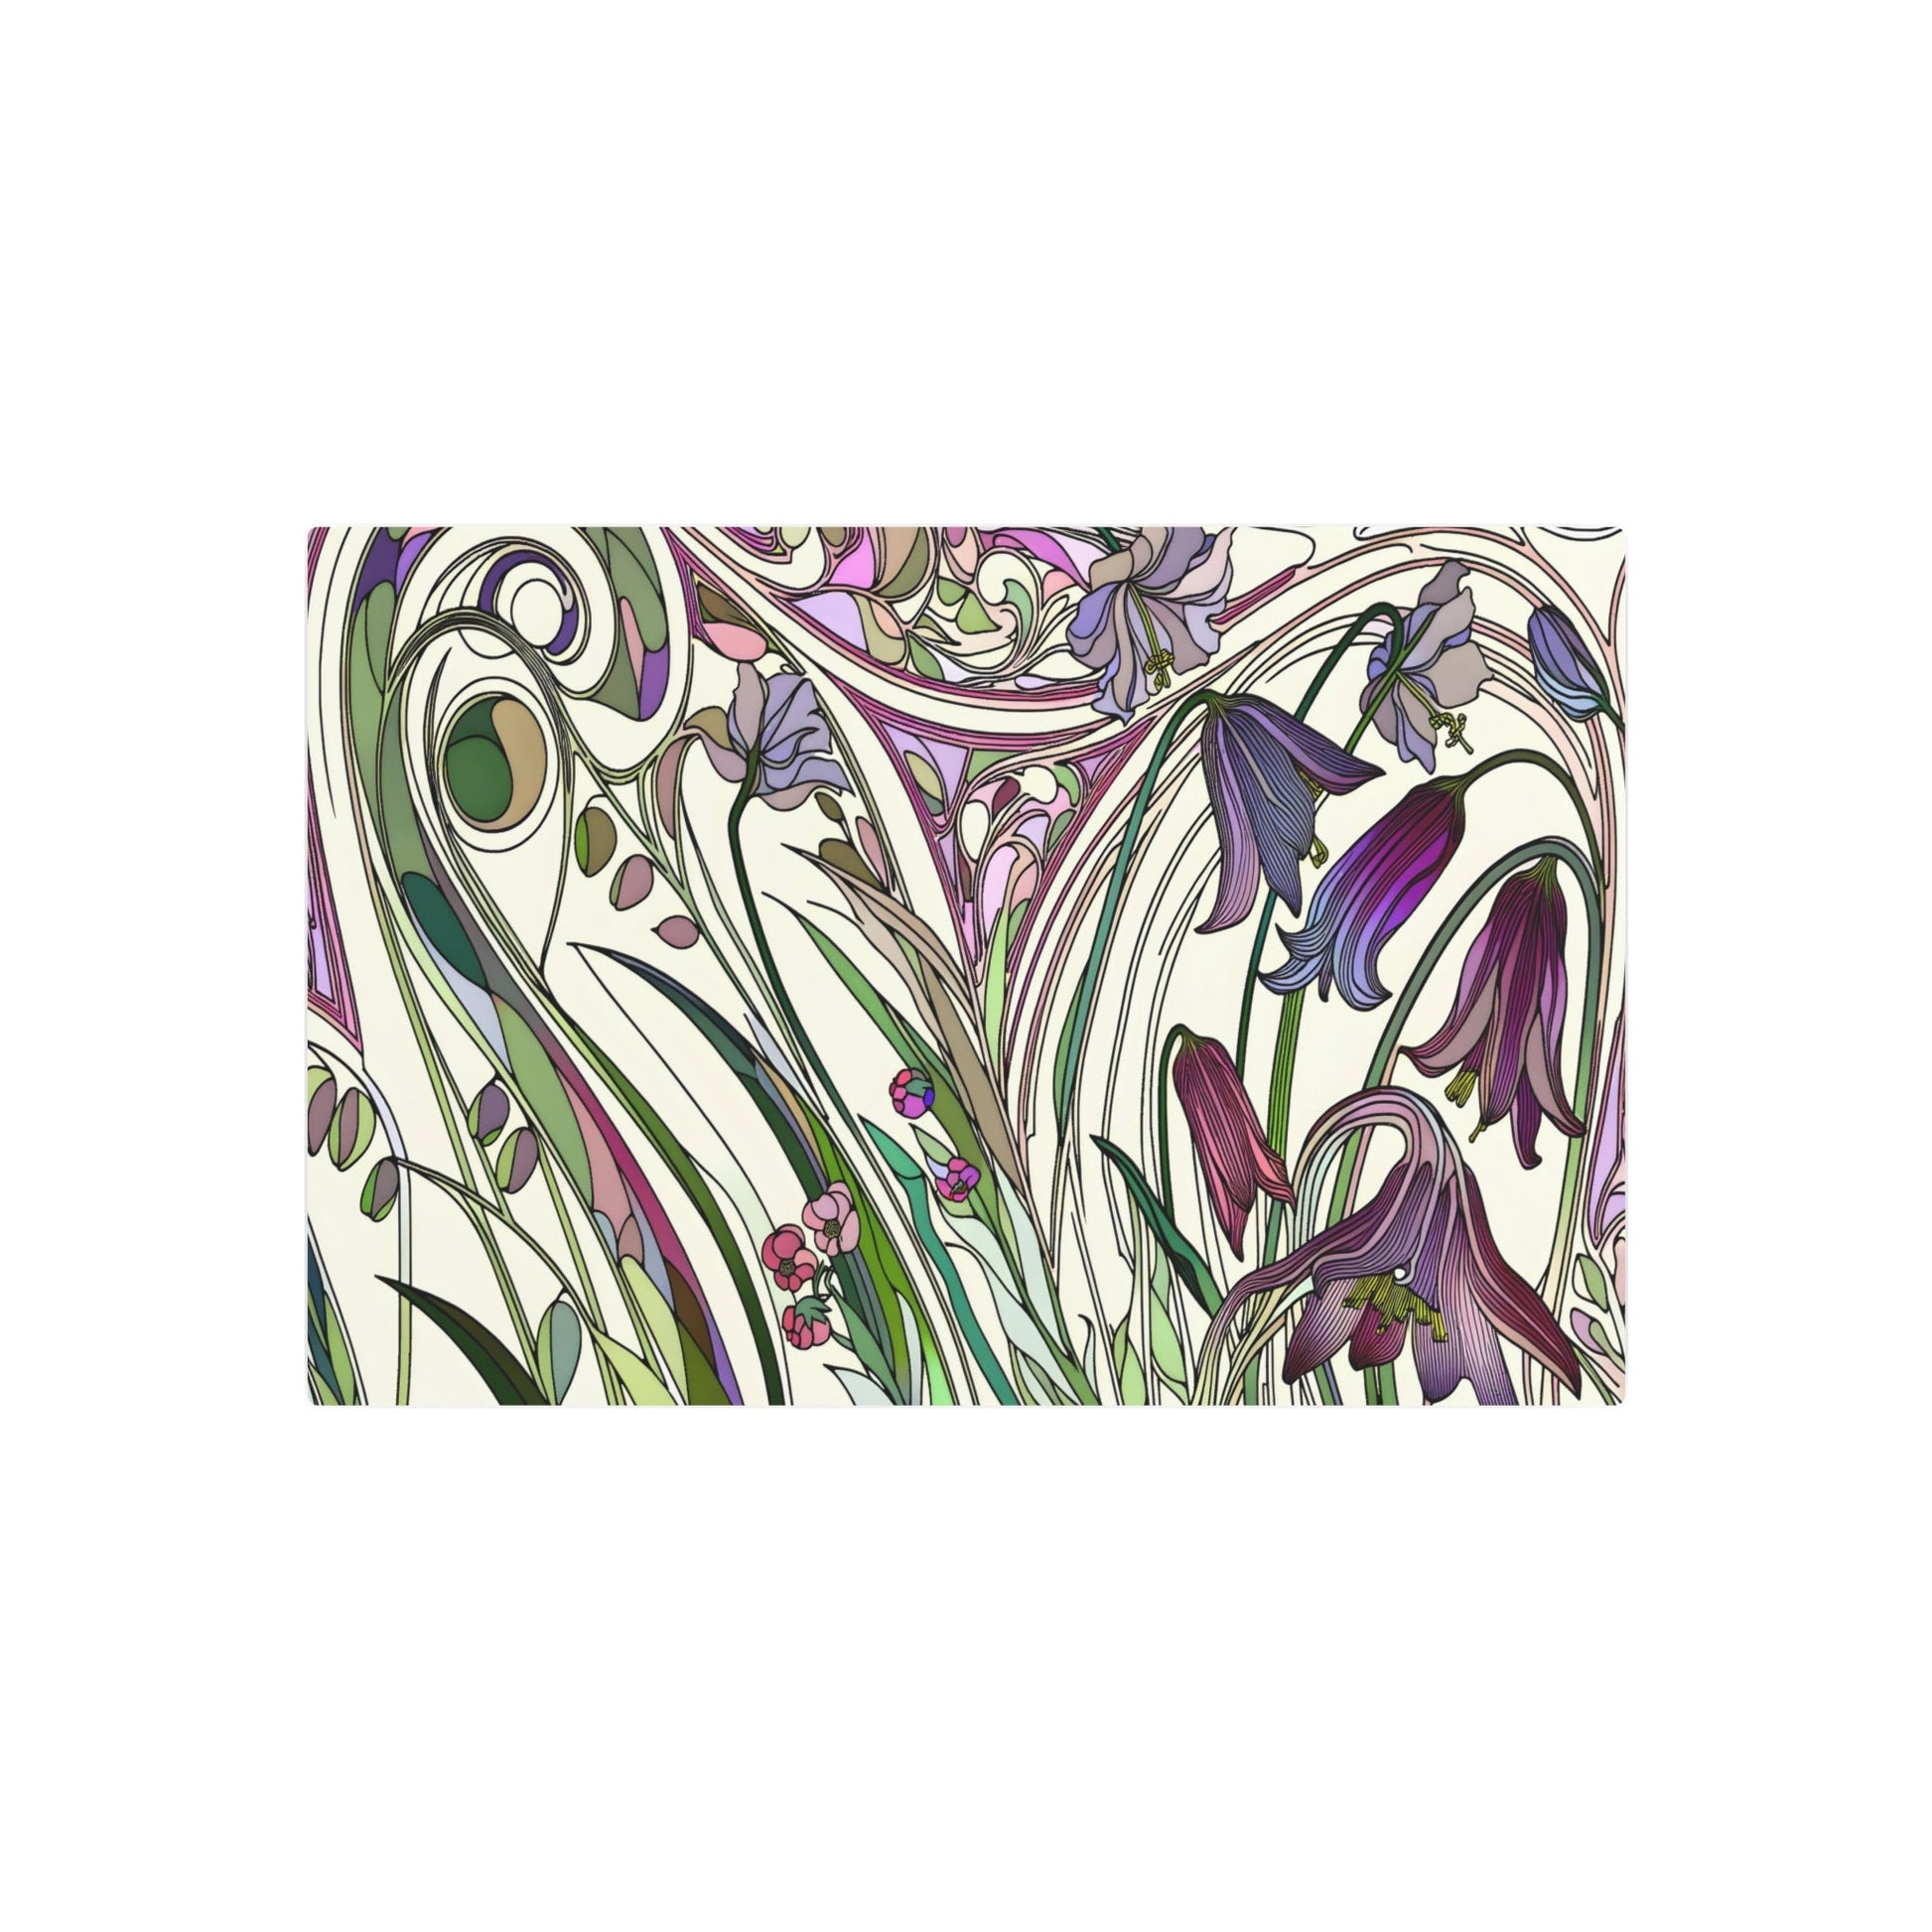 Metal Poster Art | "Art Nouveau Western Art Style: Intricate Wildflower and Botanical Illustrations with Nature-Inspired Organic Forms" - Metal Poster Art 30″ x 20″ (Horizontal) 0.12''